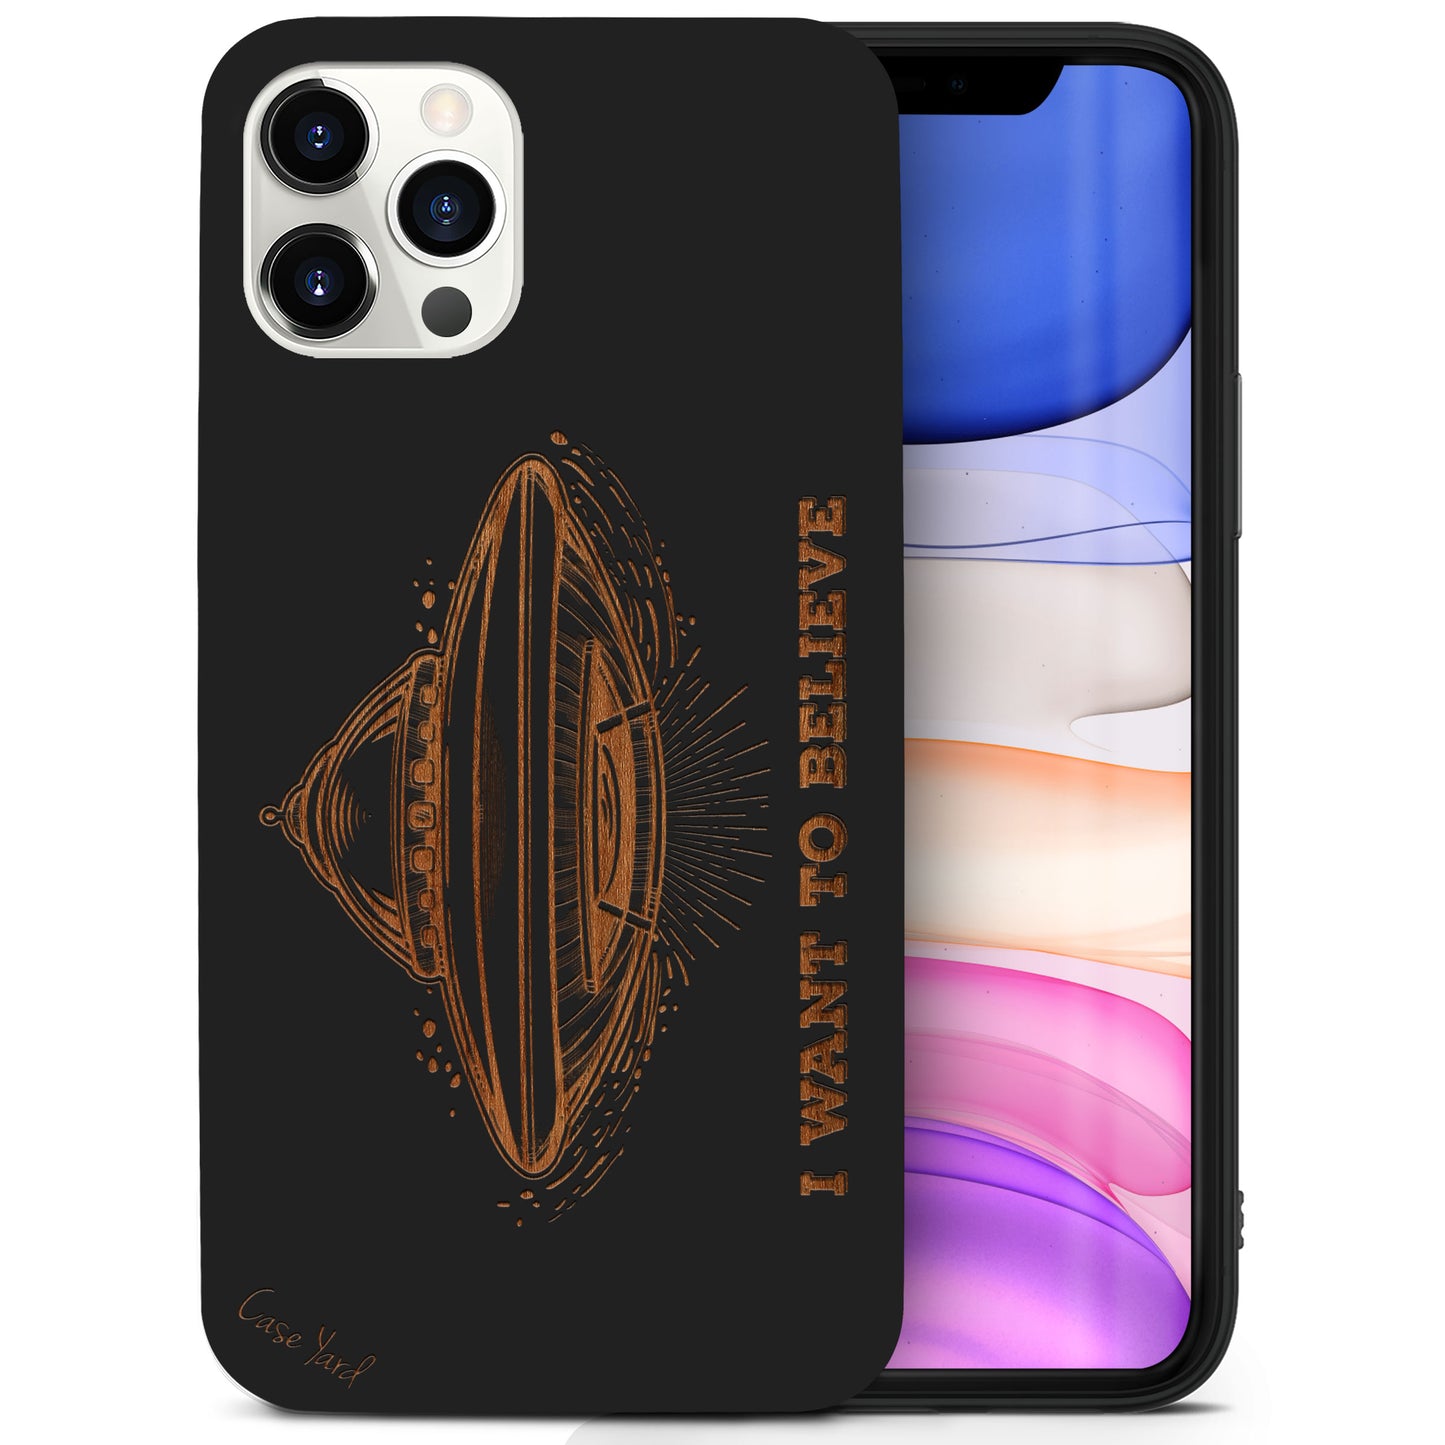 Wooden Cell Phone Case Cover, Laser Engraved case for iPhone & Samsung phone I Want to Believe Design